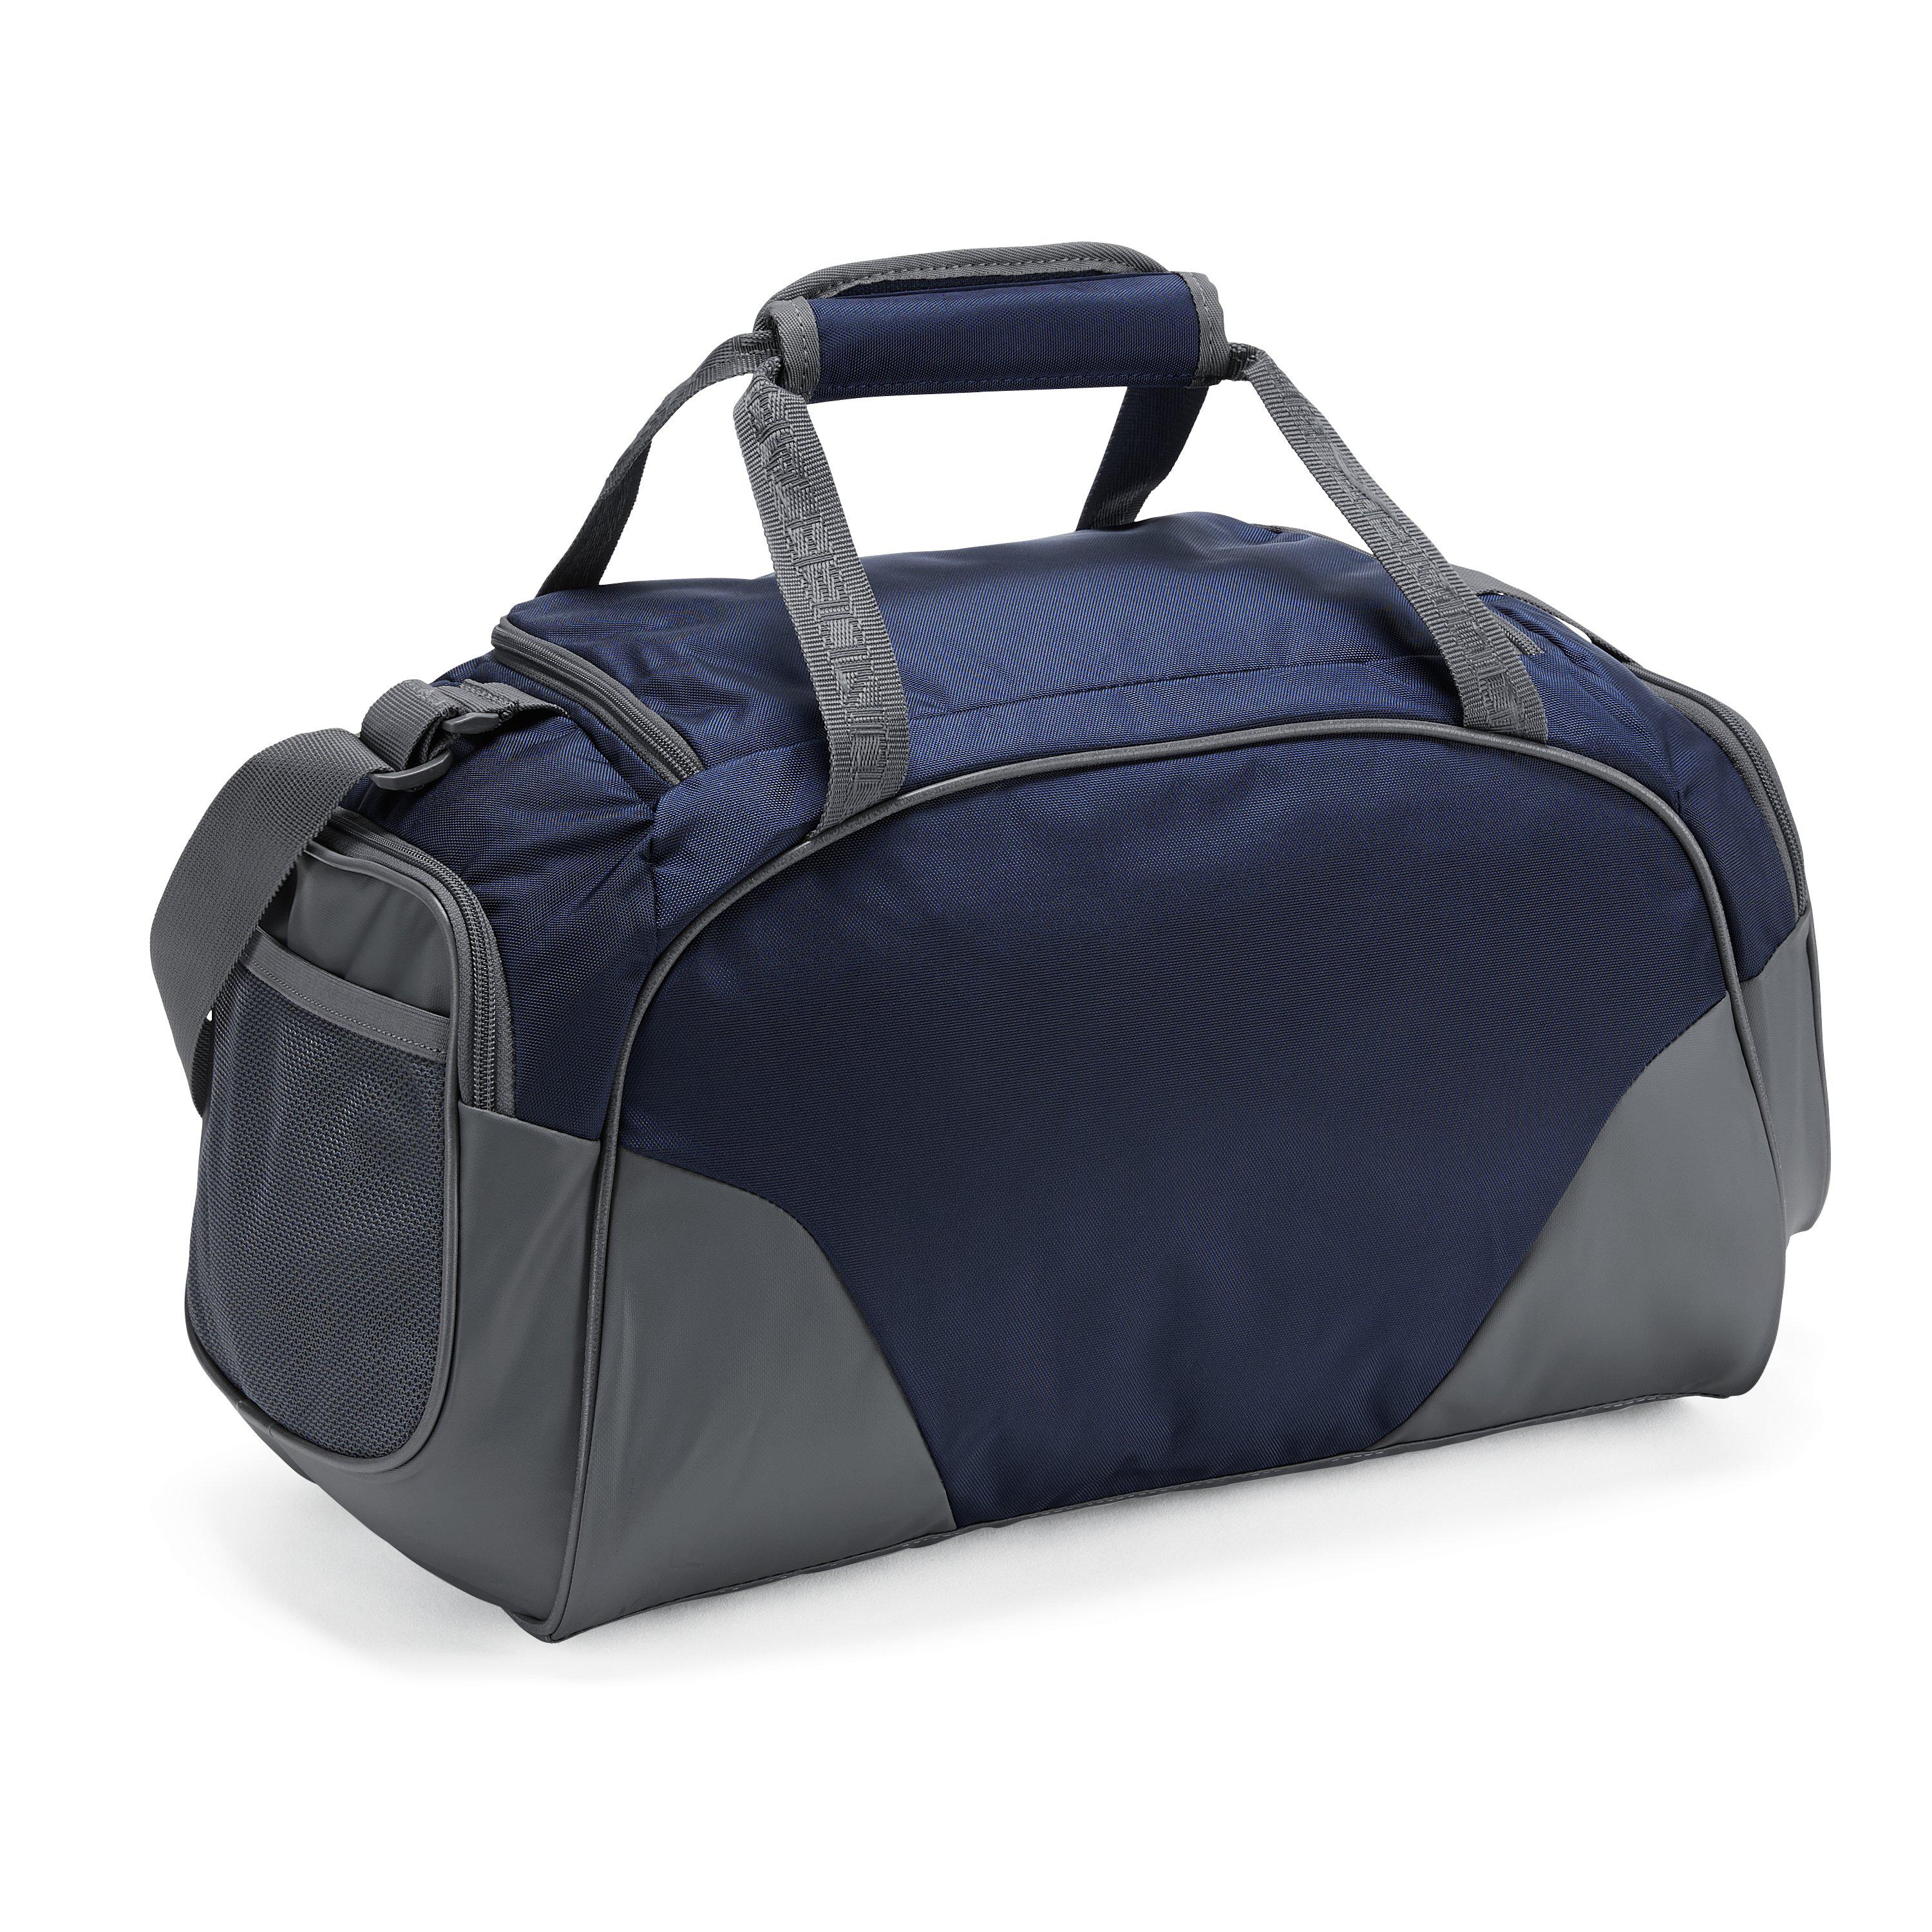 Ua Undeniable 3.0 Extra Small Duffle, Buy Now, Hotsell, 56% OFF,  www.busformentera.com